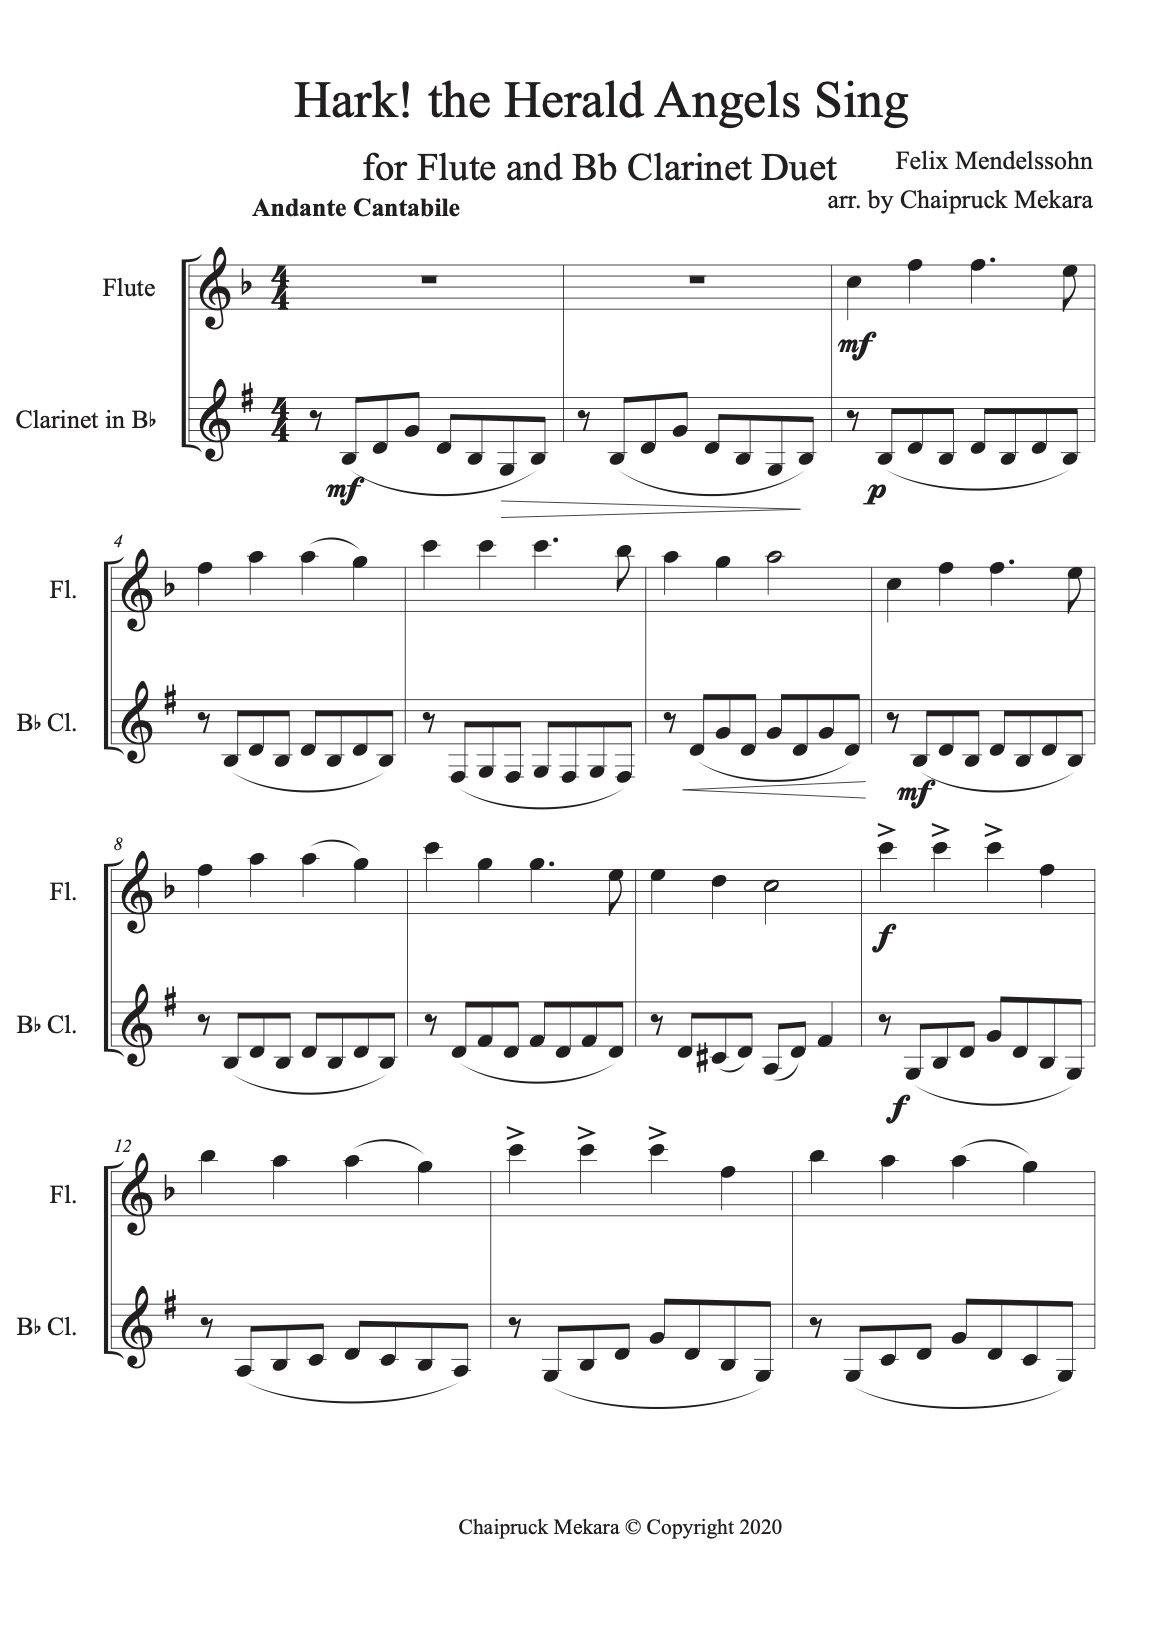 Hark! the Herald Angels Sing for Flute and Clarinet Duet (score+part) - ChaipruckMekara